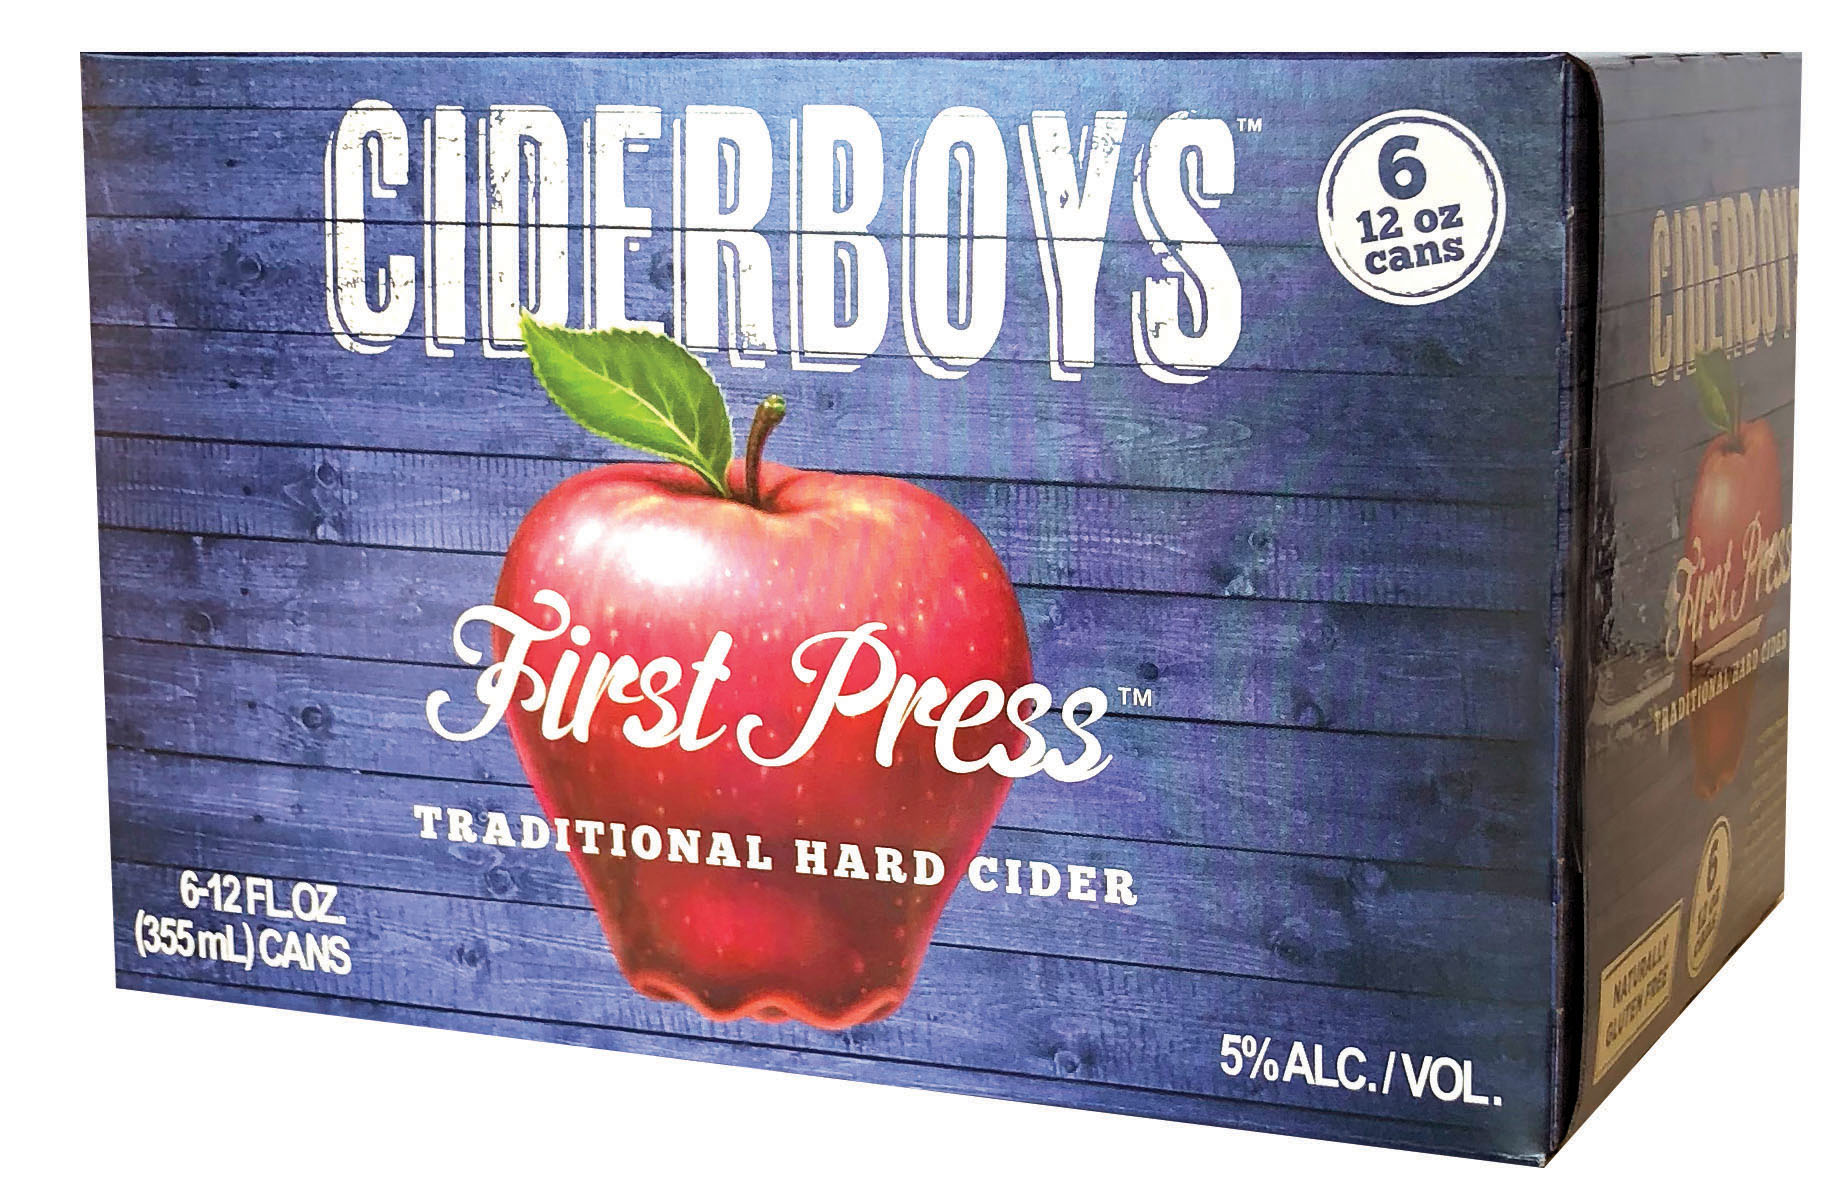 Ciderboys Fist Press 6 Pack Can